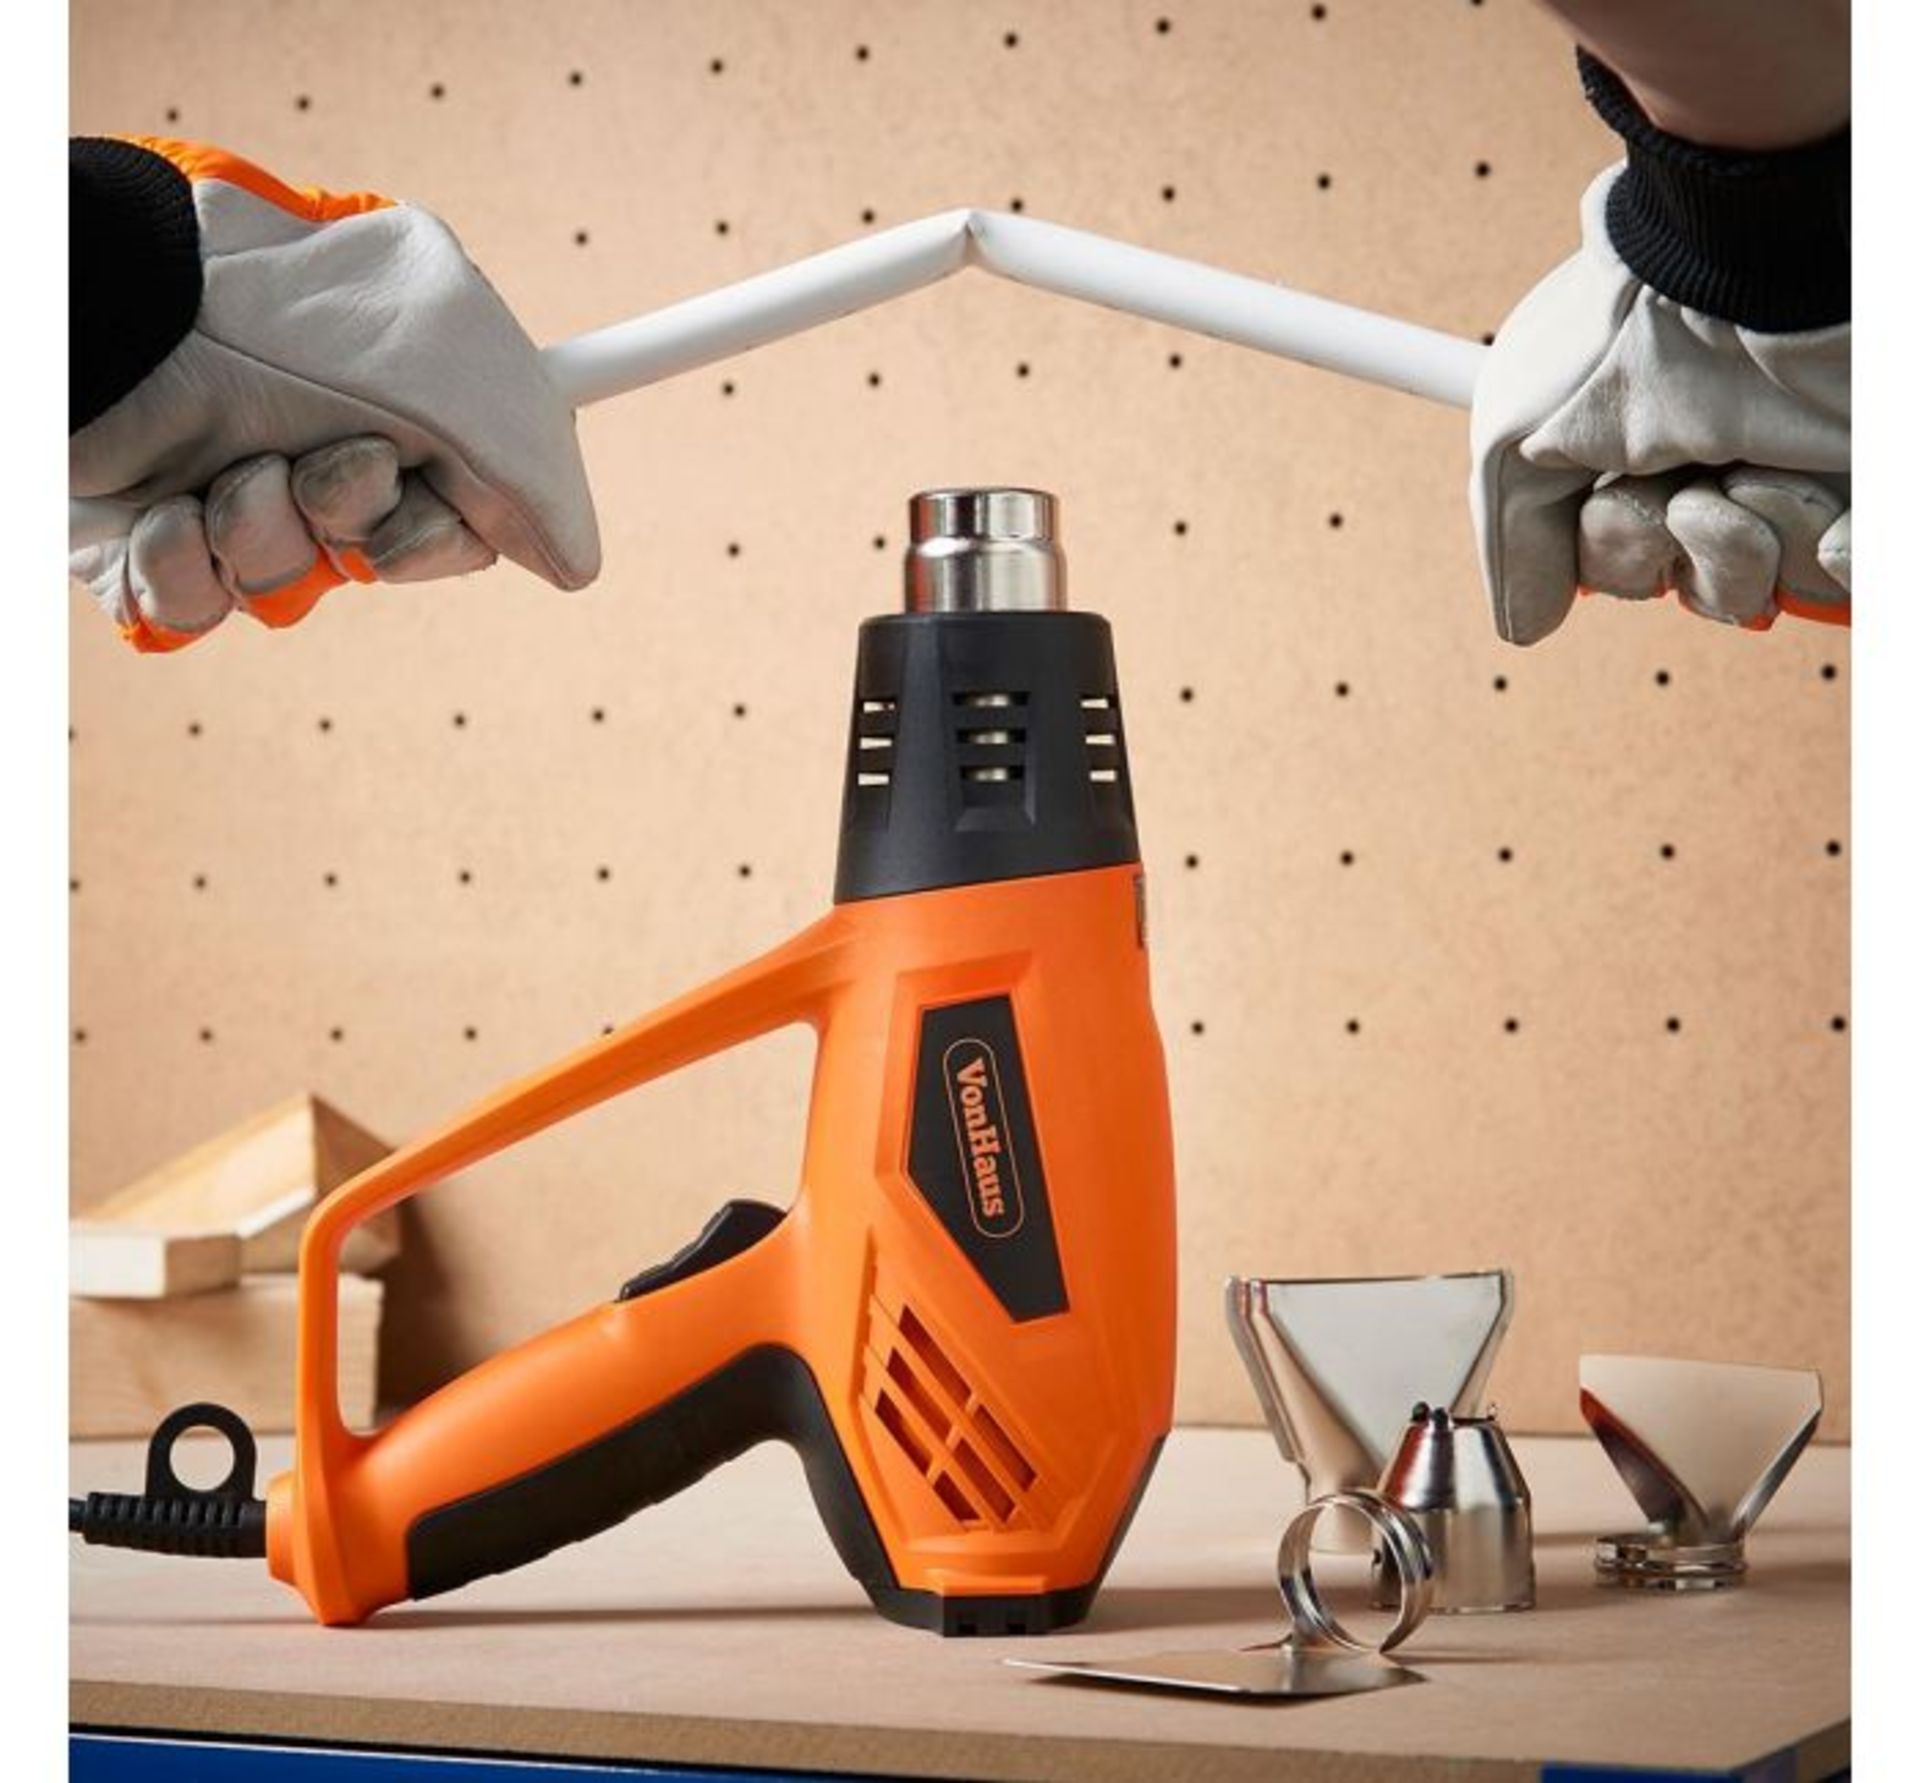 (JH56) 2000W Heat Gun Ideal for DIY projects, bending copper pipes, loosening rusted bolts, li... - Image 3 of 3